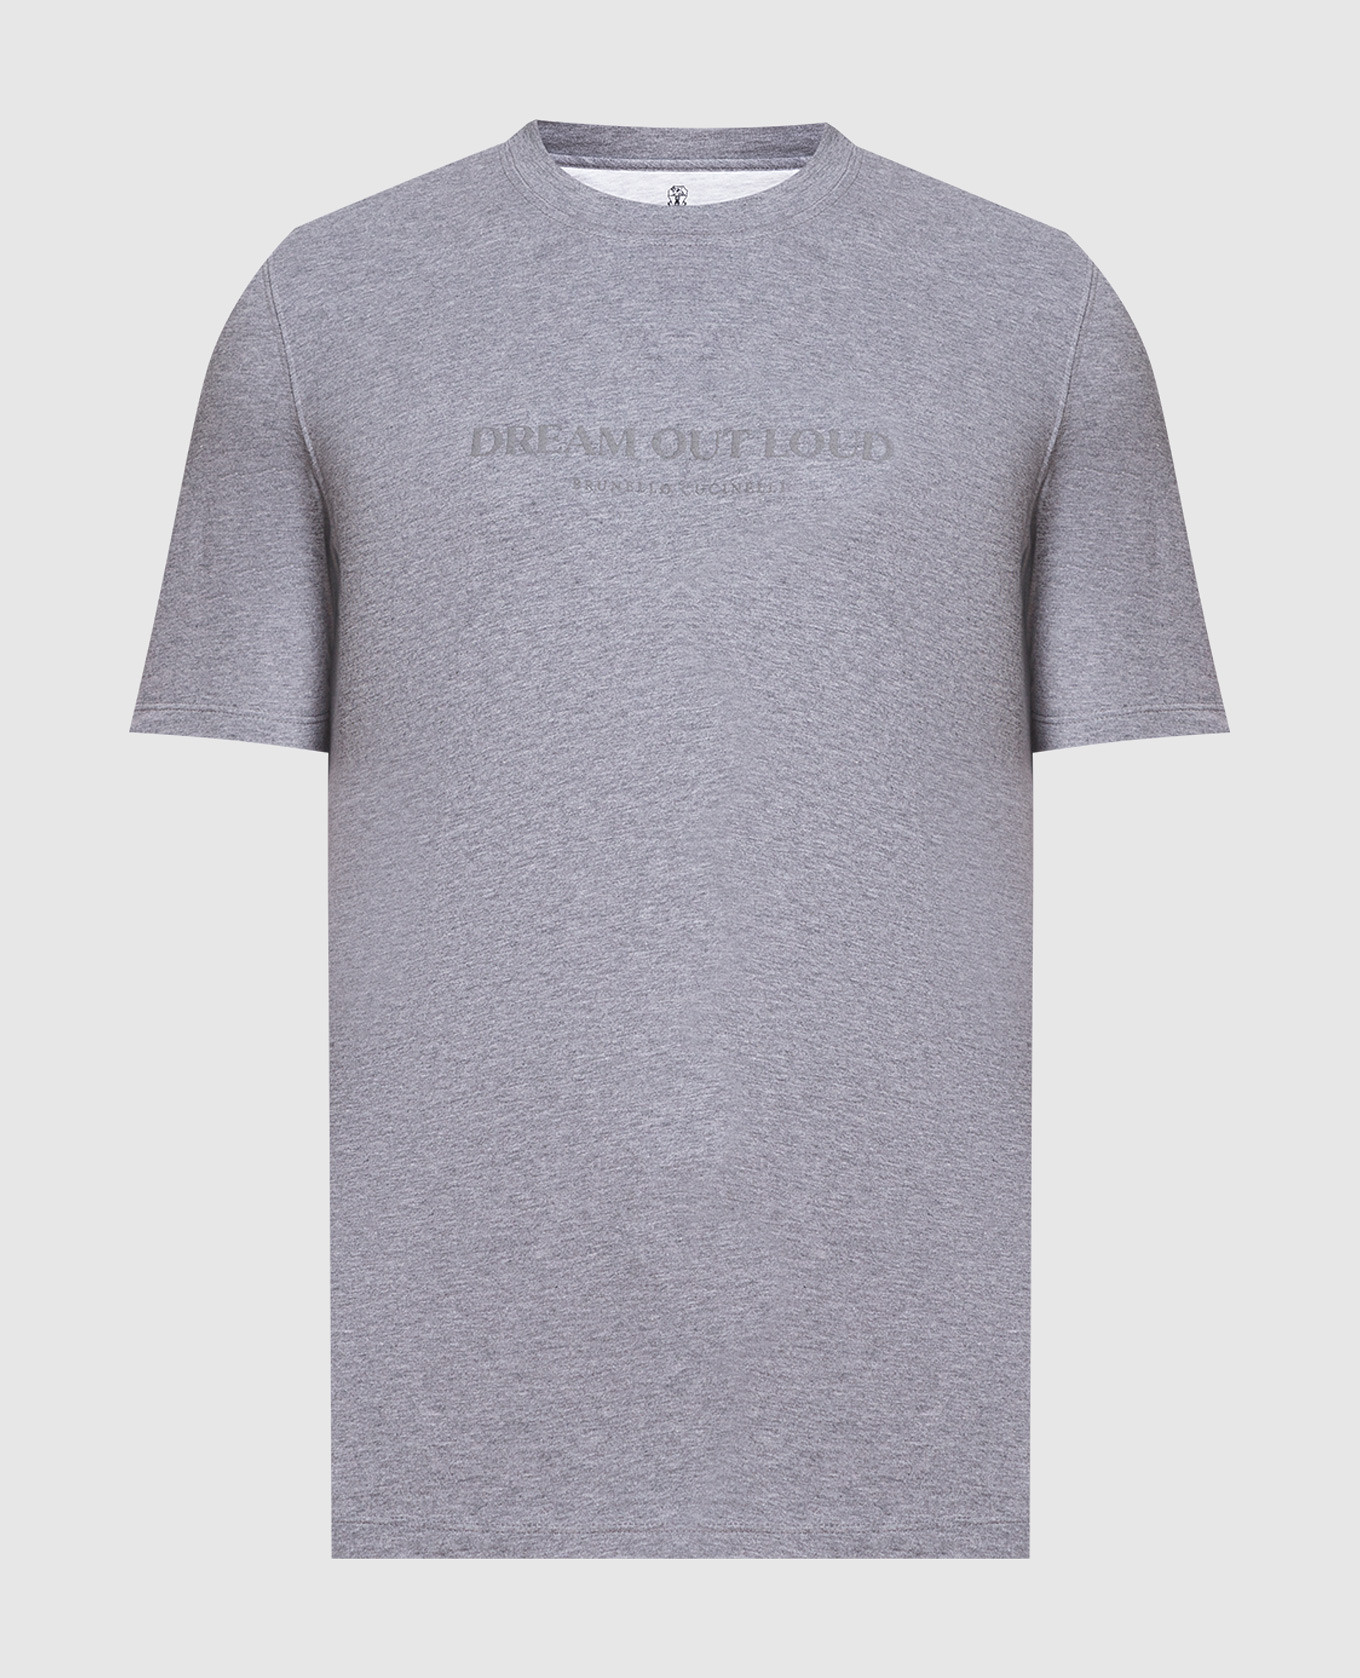 Gray t-shirt with Dream out loud print